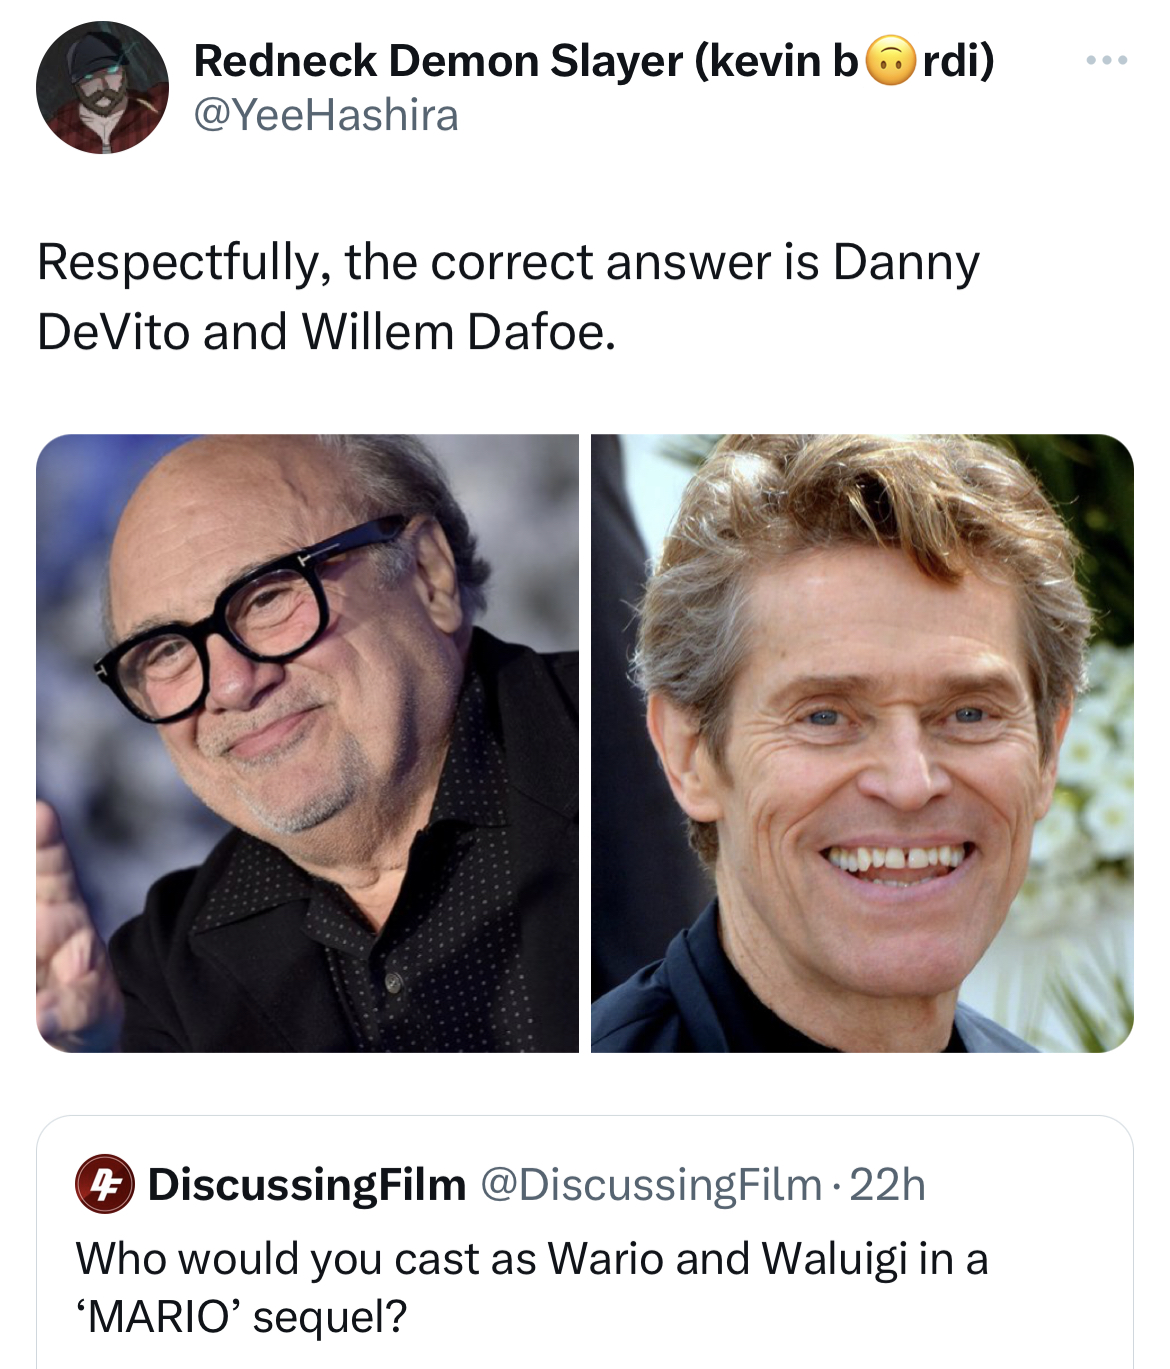 hall of fame tweets -glasses - Redneck Demon Slayer kevin b Respectfully, the correct answer is Danny DeVito and Willem Dafoe. DiscussingFilm Who would you cast as Wario and Waluigi in a 'Mario' sequel? www